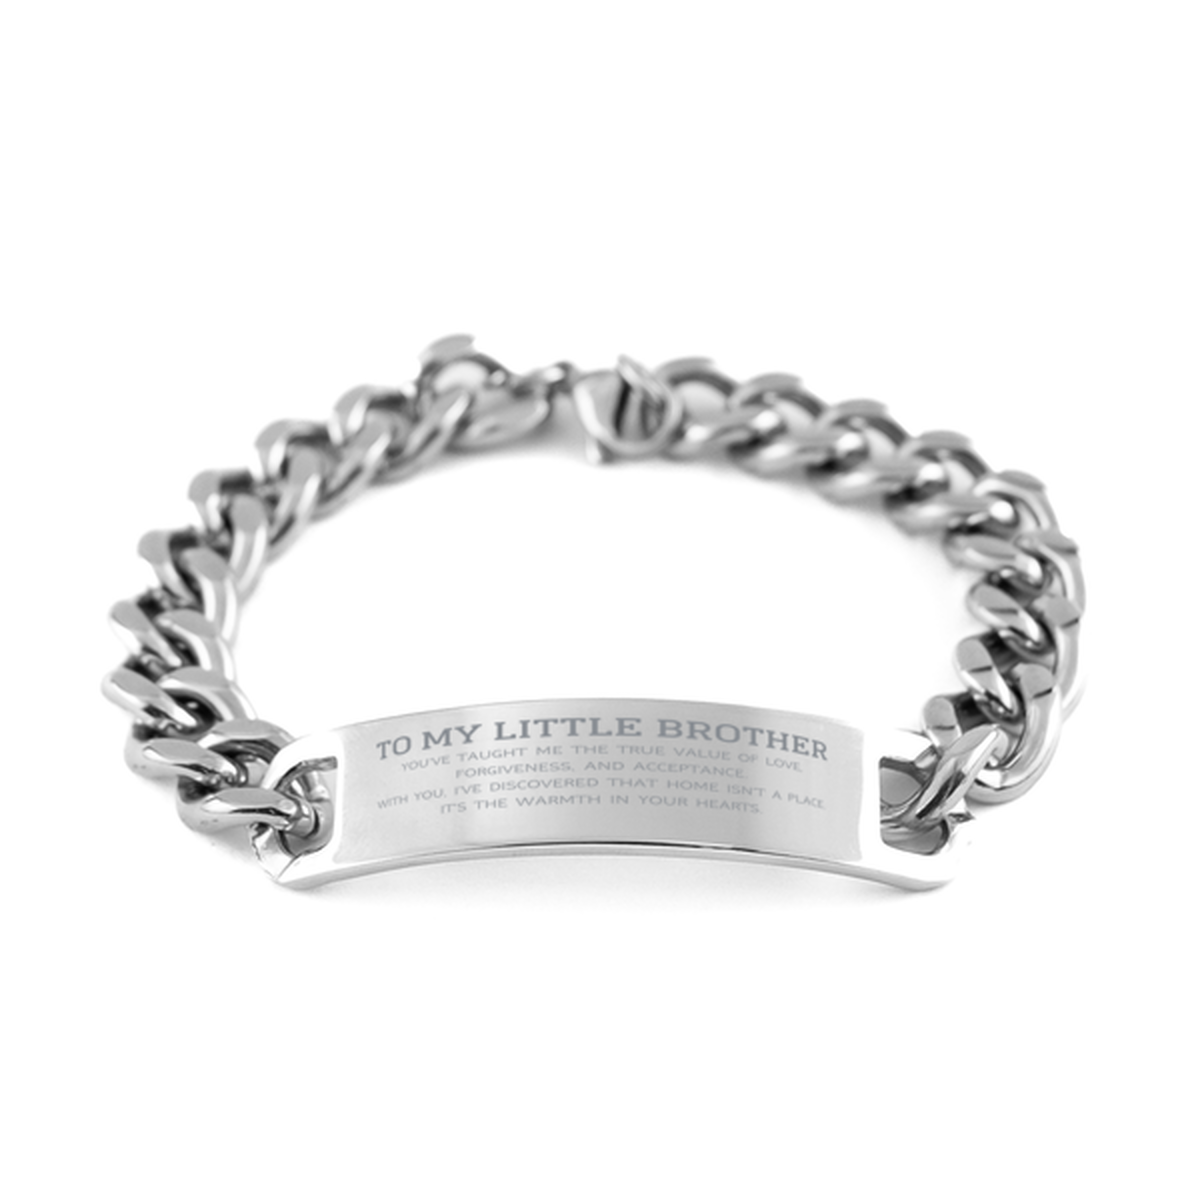 To My Little Brother Gifts, You've taught me the true value of love, Thank You Gifts For Little Brother, Birthday Cuban Chain Stainless Steel Bracelet For Little Brother